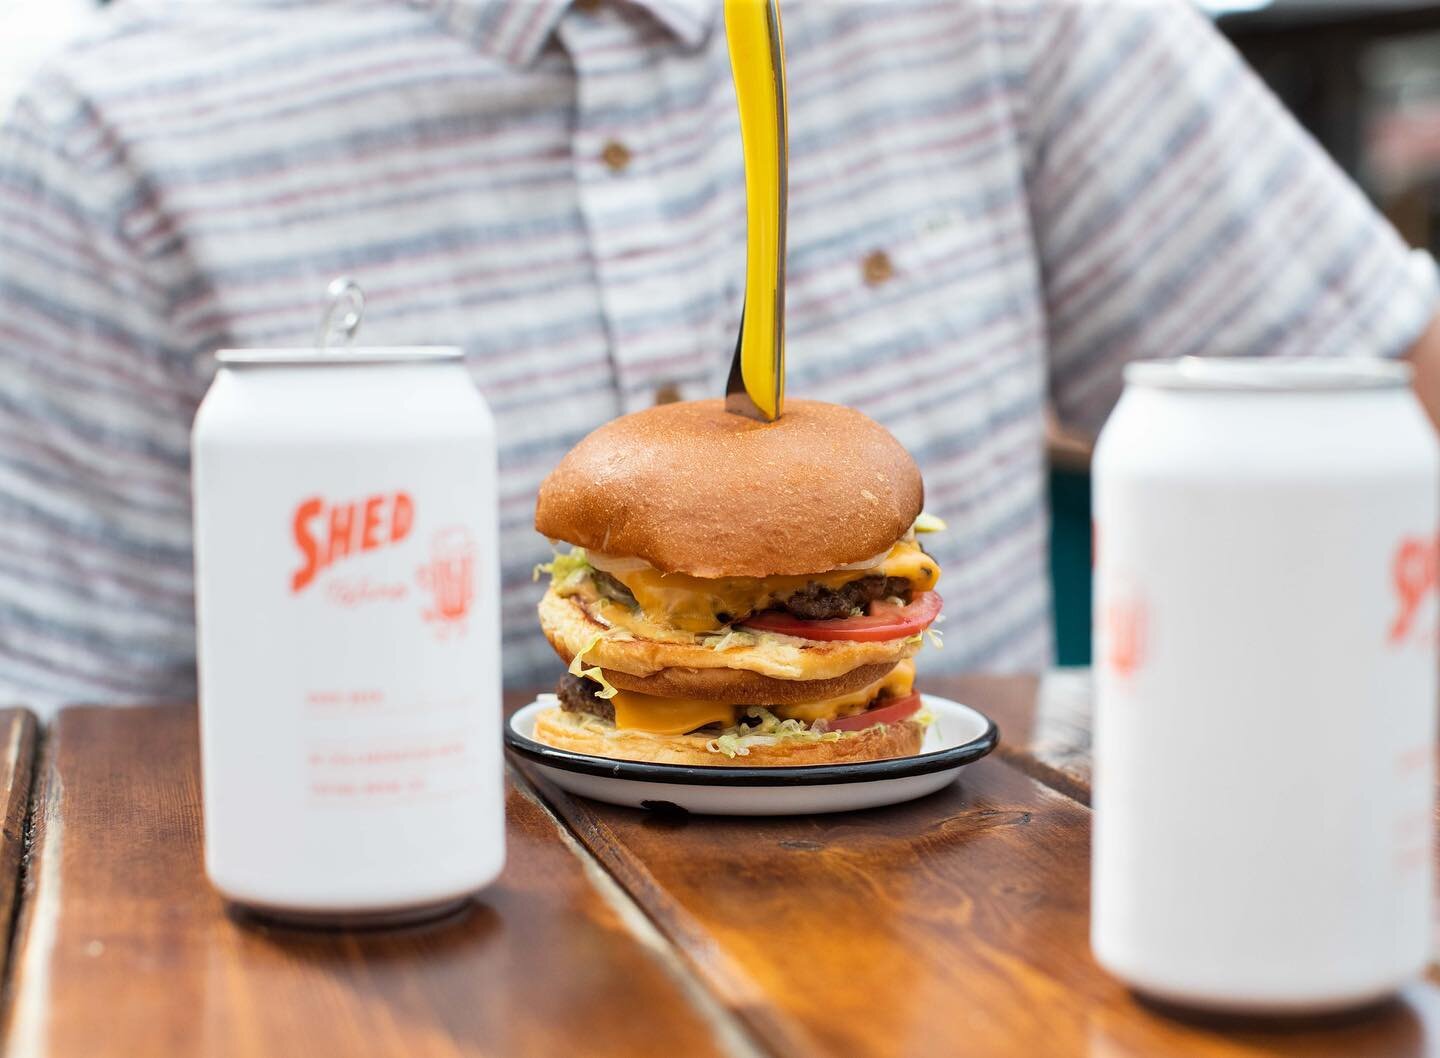 The road to get here is a long one, but we assure you, it&rsquo;s worth it ✨🍔
*
*
*
*
*
#burgersatshed #shedtofino #shedcrew #shedfaced #burgerlovers #burgersallday #nomnomnom #burgerandfries #tofinobcfood #fooddestinations #yougottaeathere #foodies